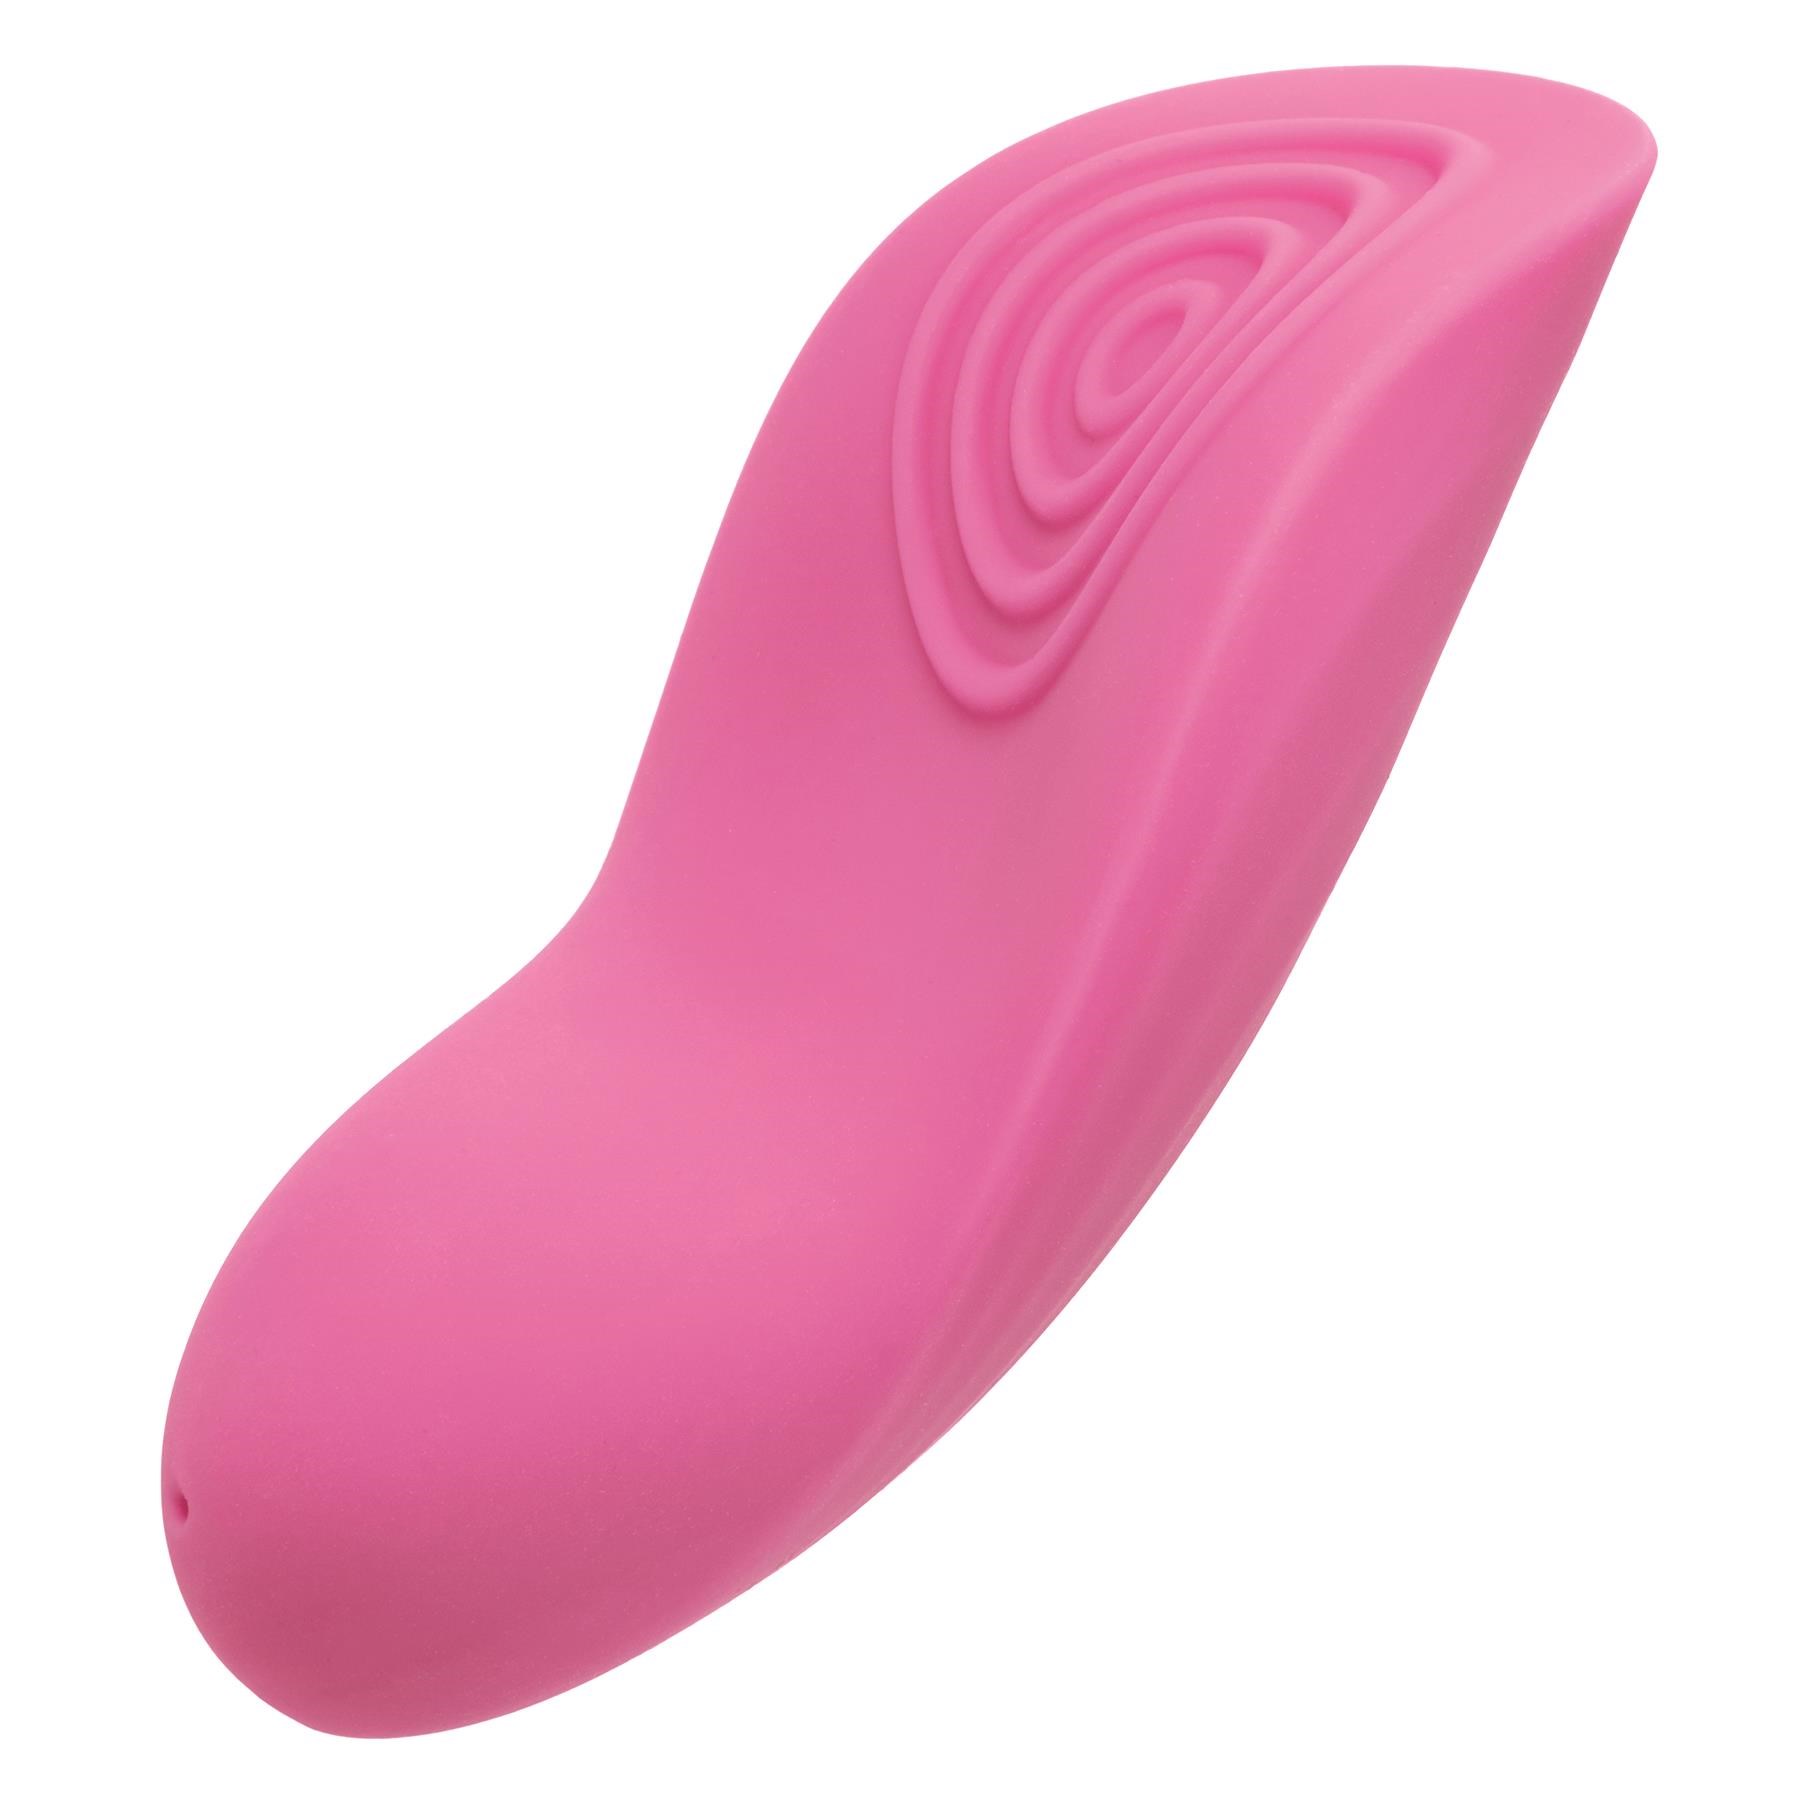 Luvmor Teases Rechargeable Massager - Product Shot #6